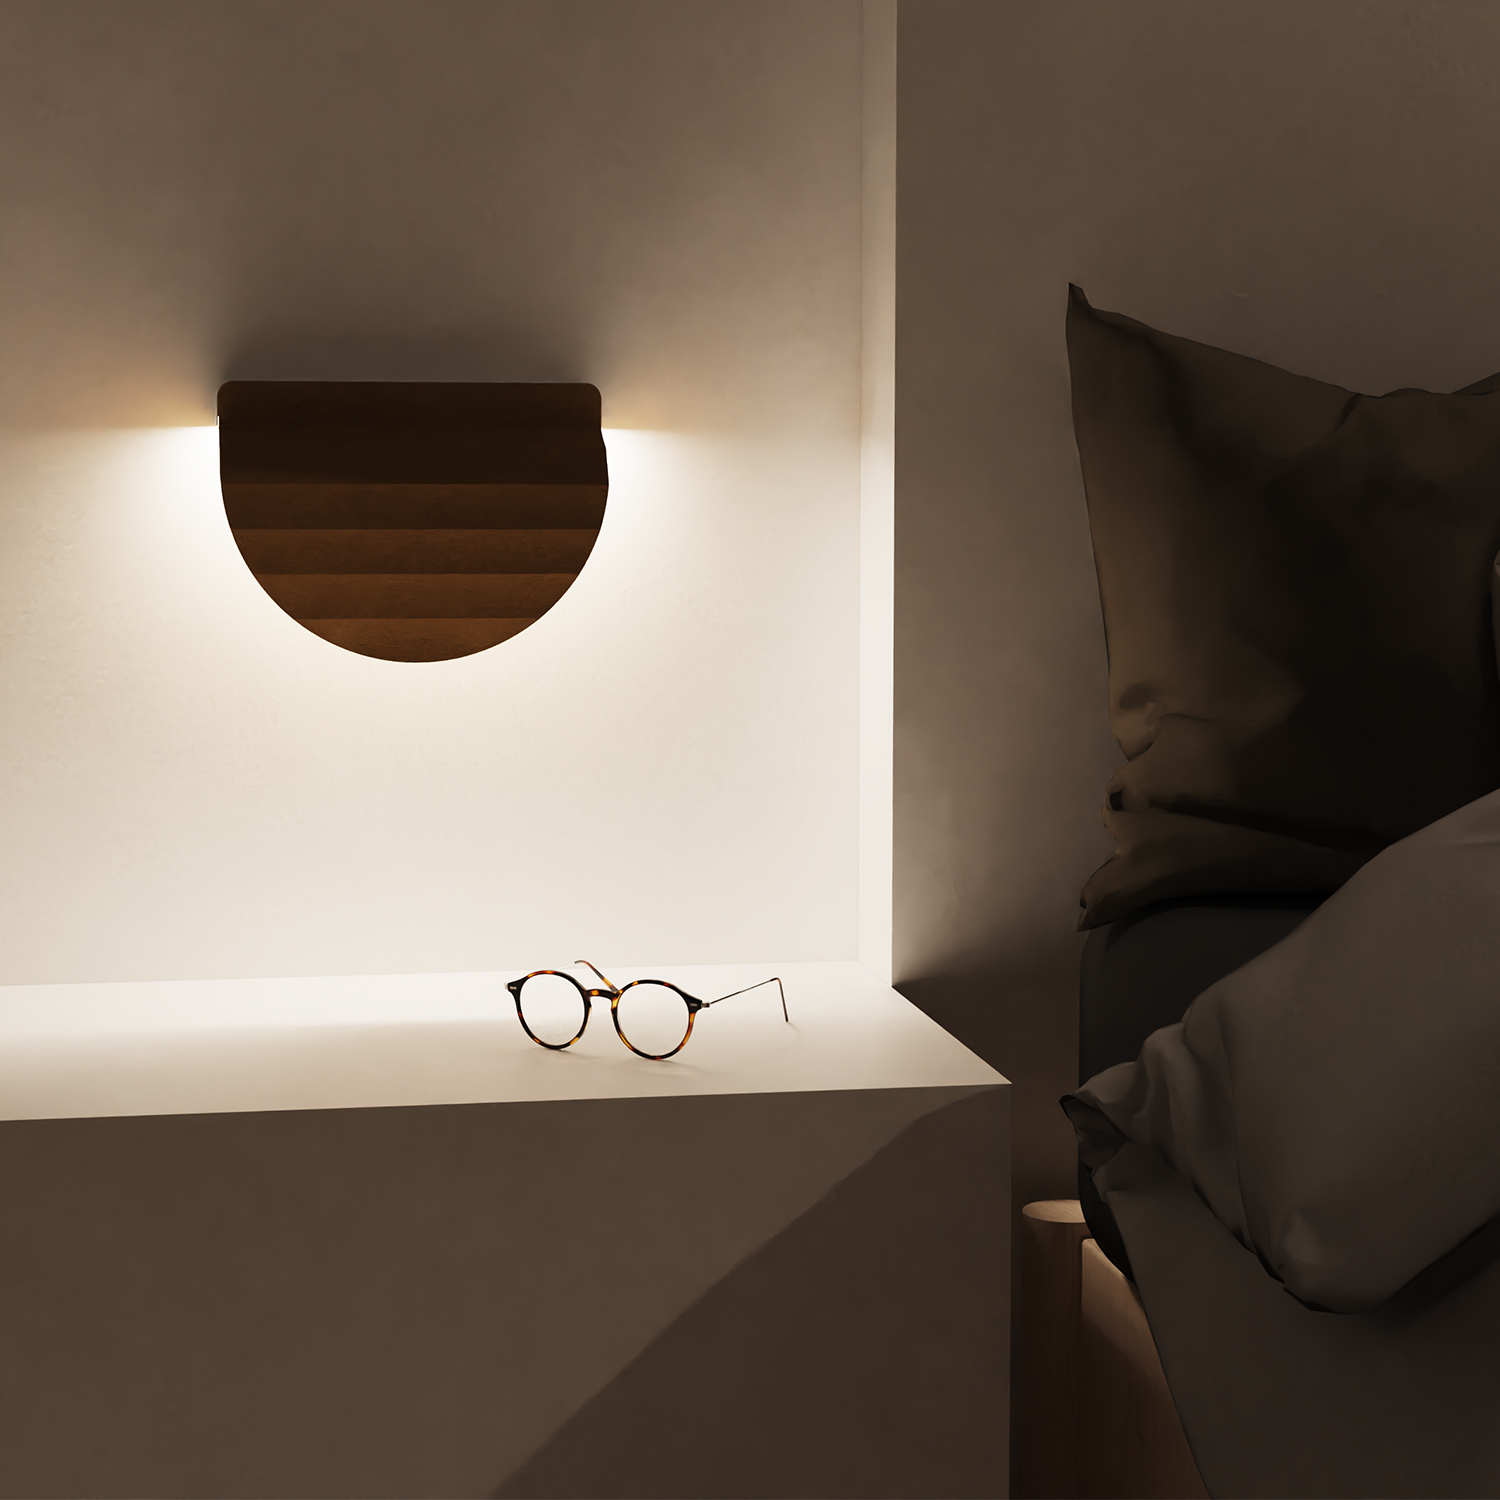 Rendering of PULP used as wall mounted bedside light